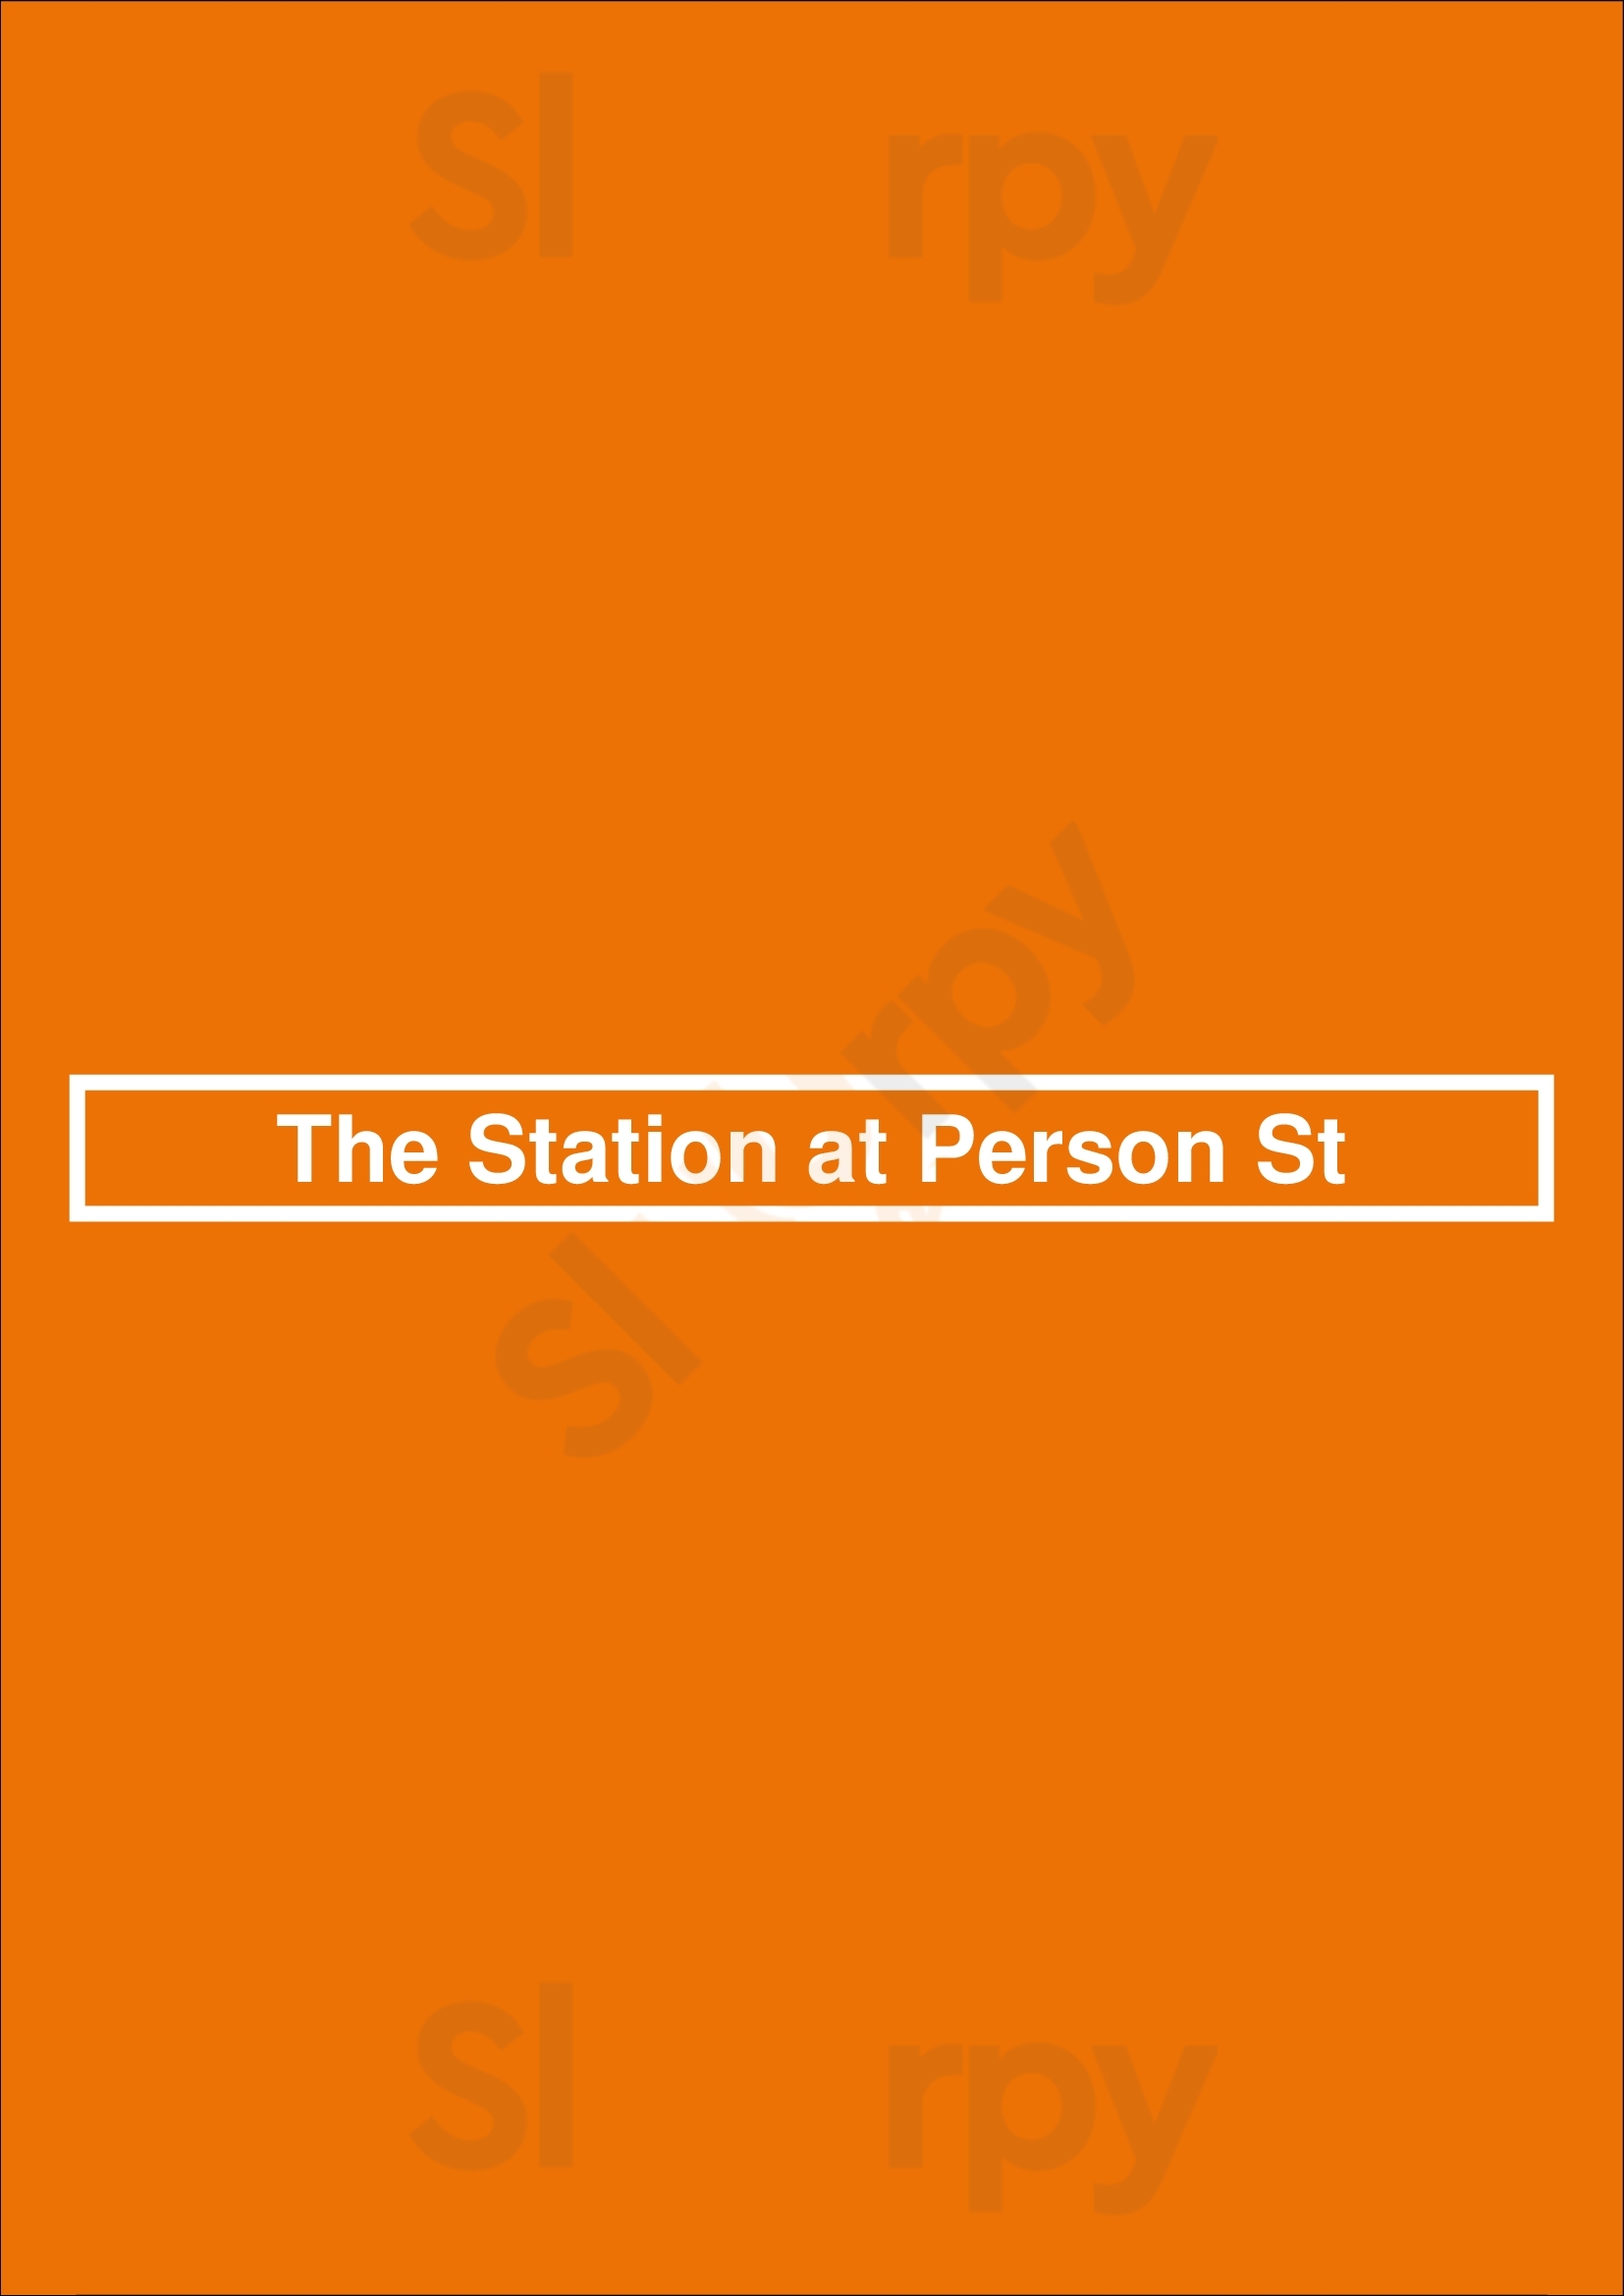 The Station At Person St Raleigh Menu - 1